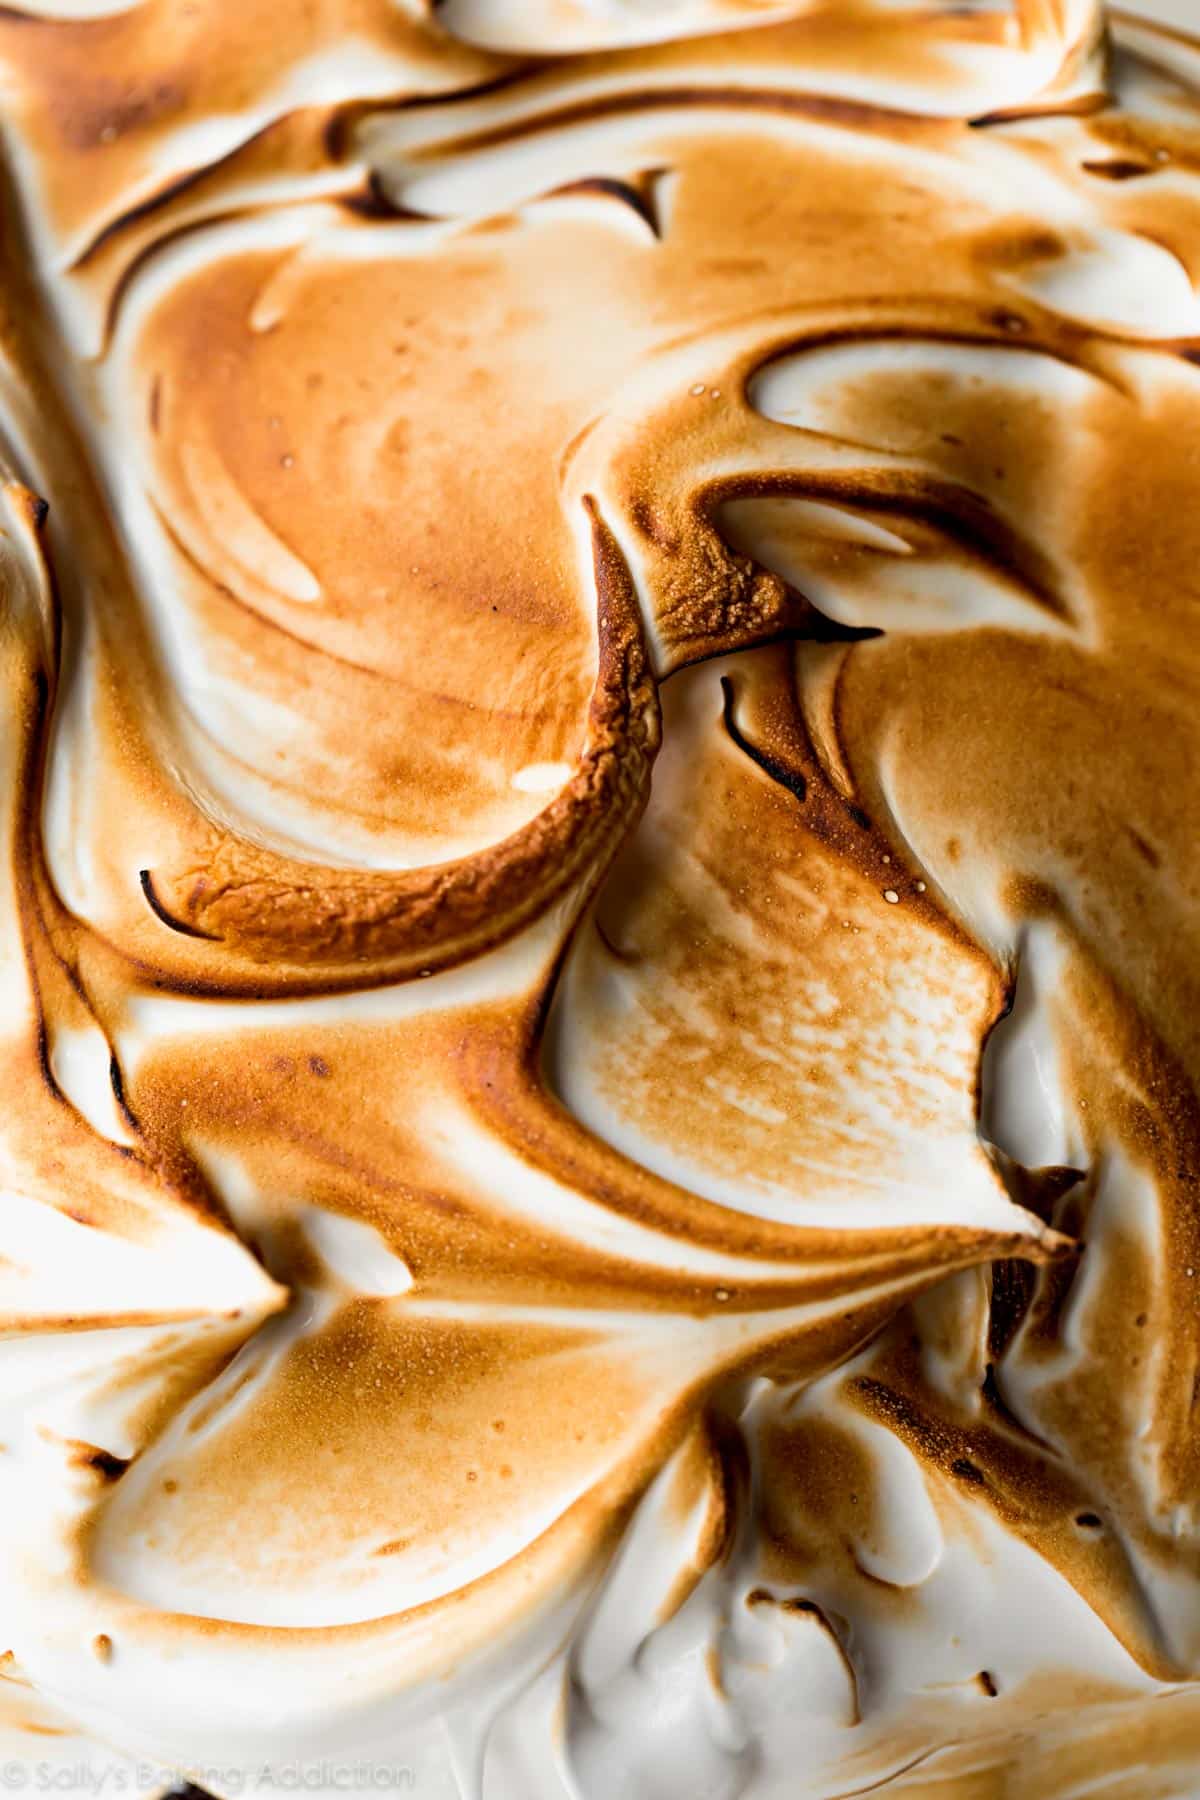 zoomed in image of toasted meringue brownie baked Alaska topping